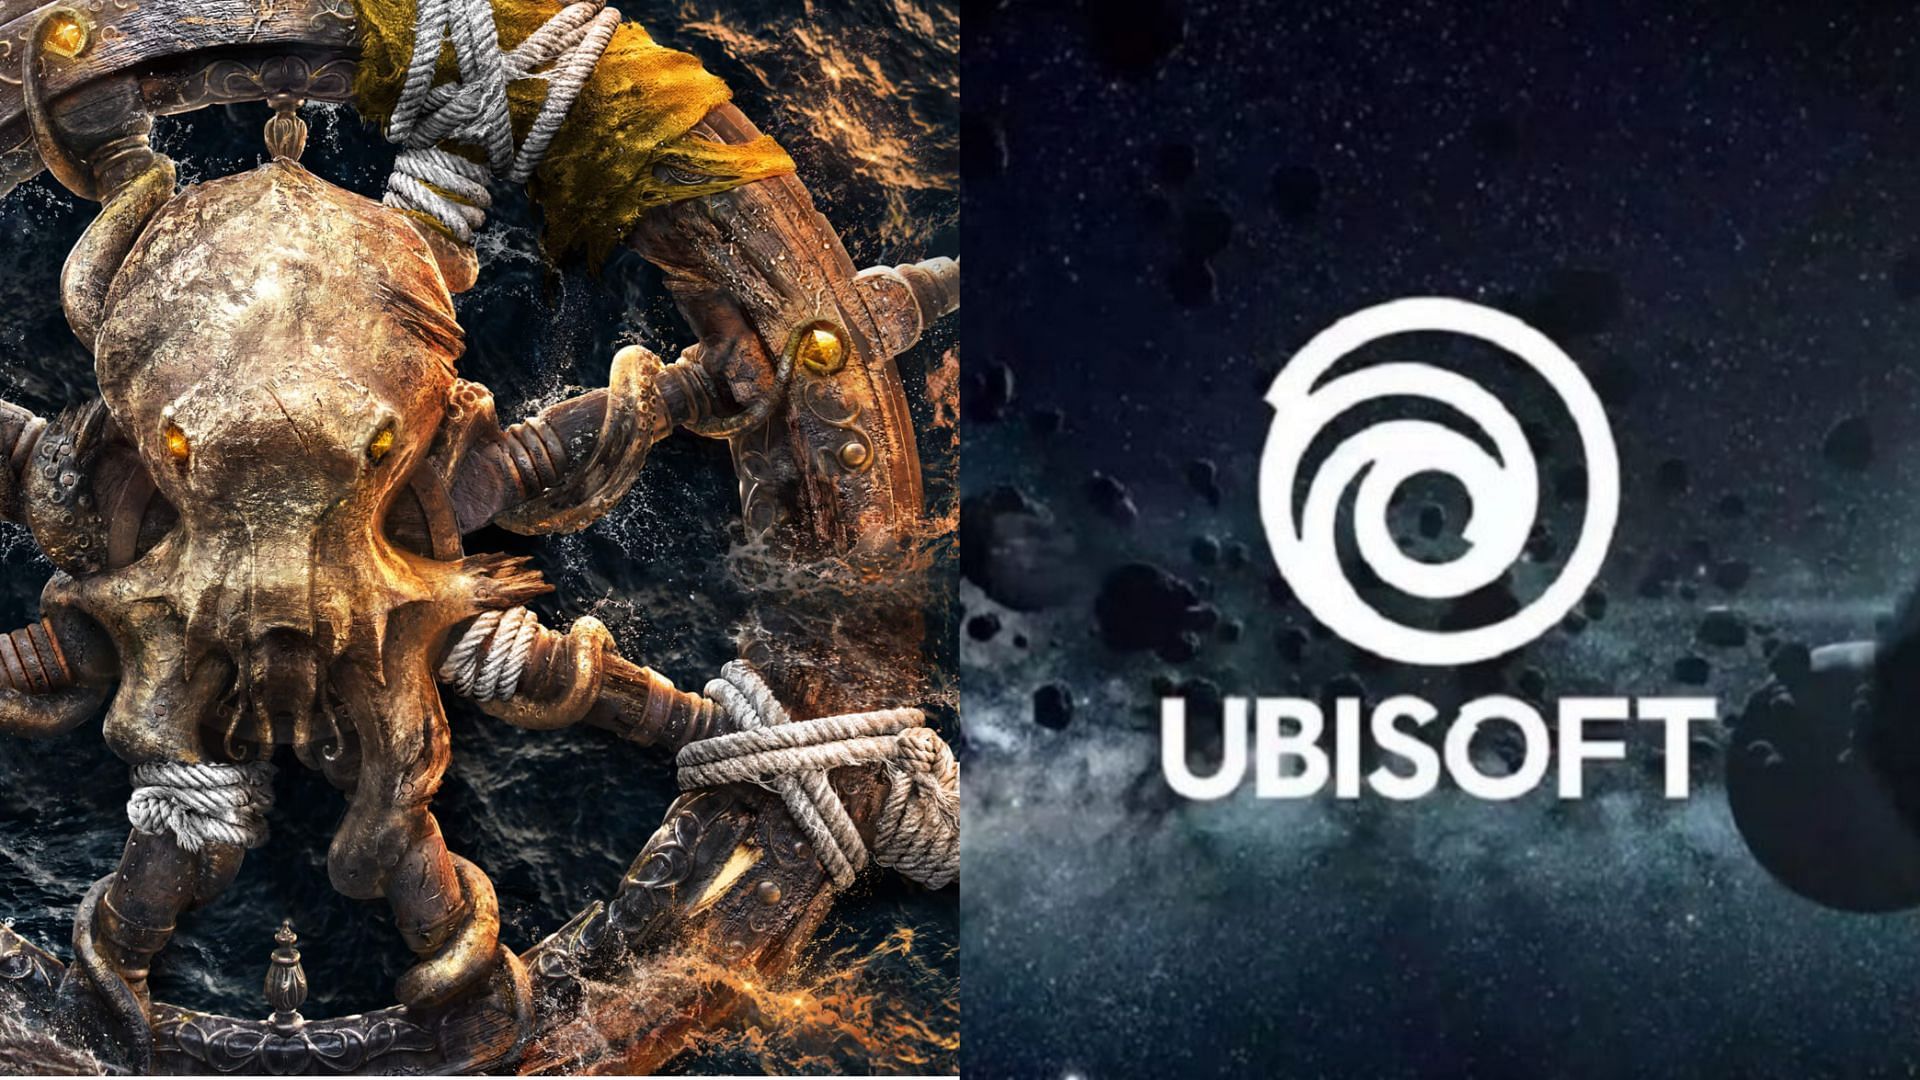 Skull and Bones delayed as Ubisoft reportedly cancelled upcoming games (Images via Ubisoft)